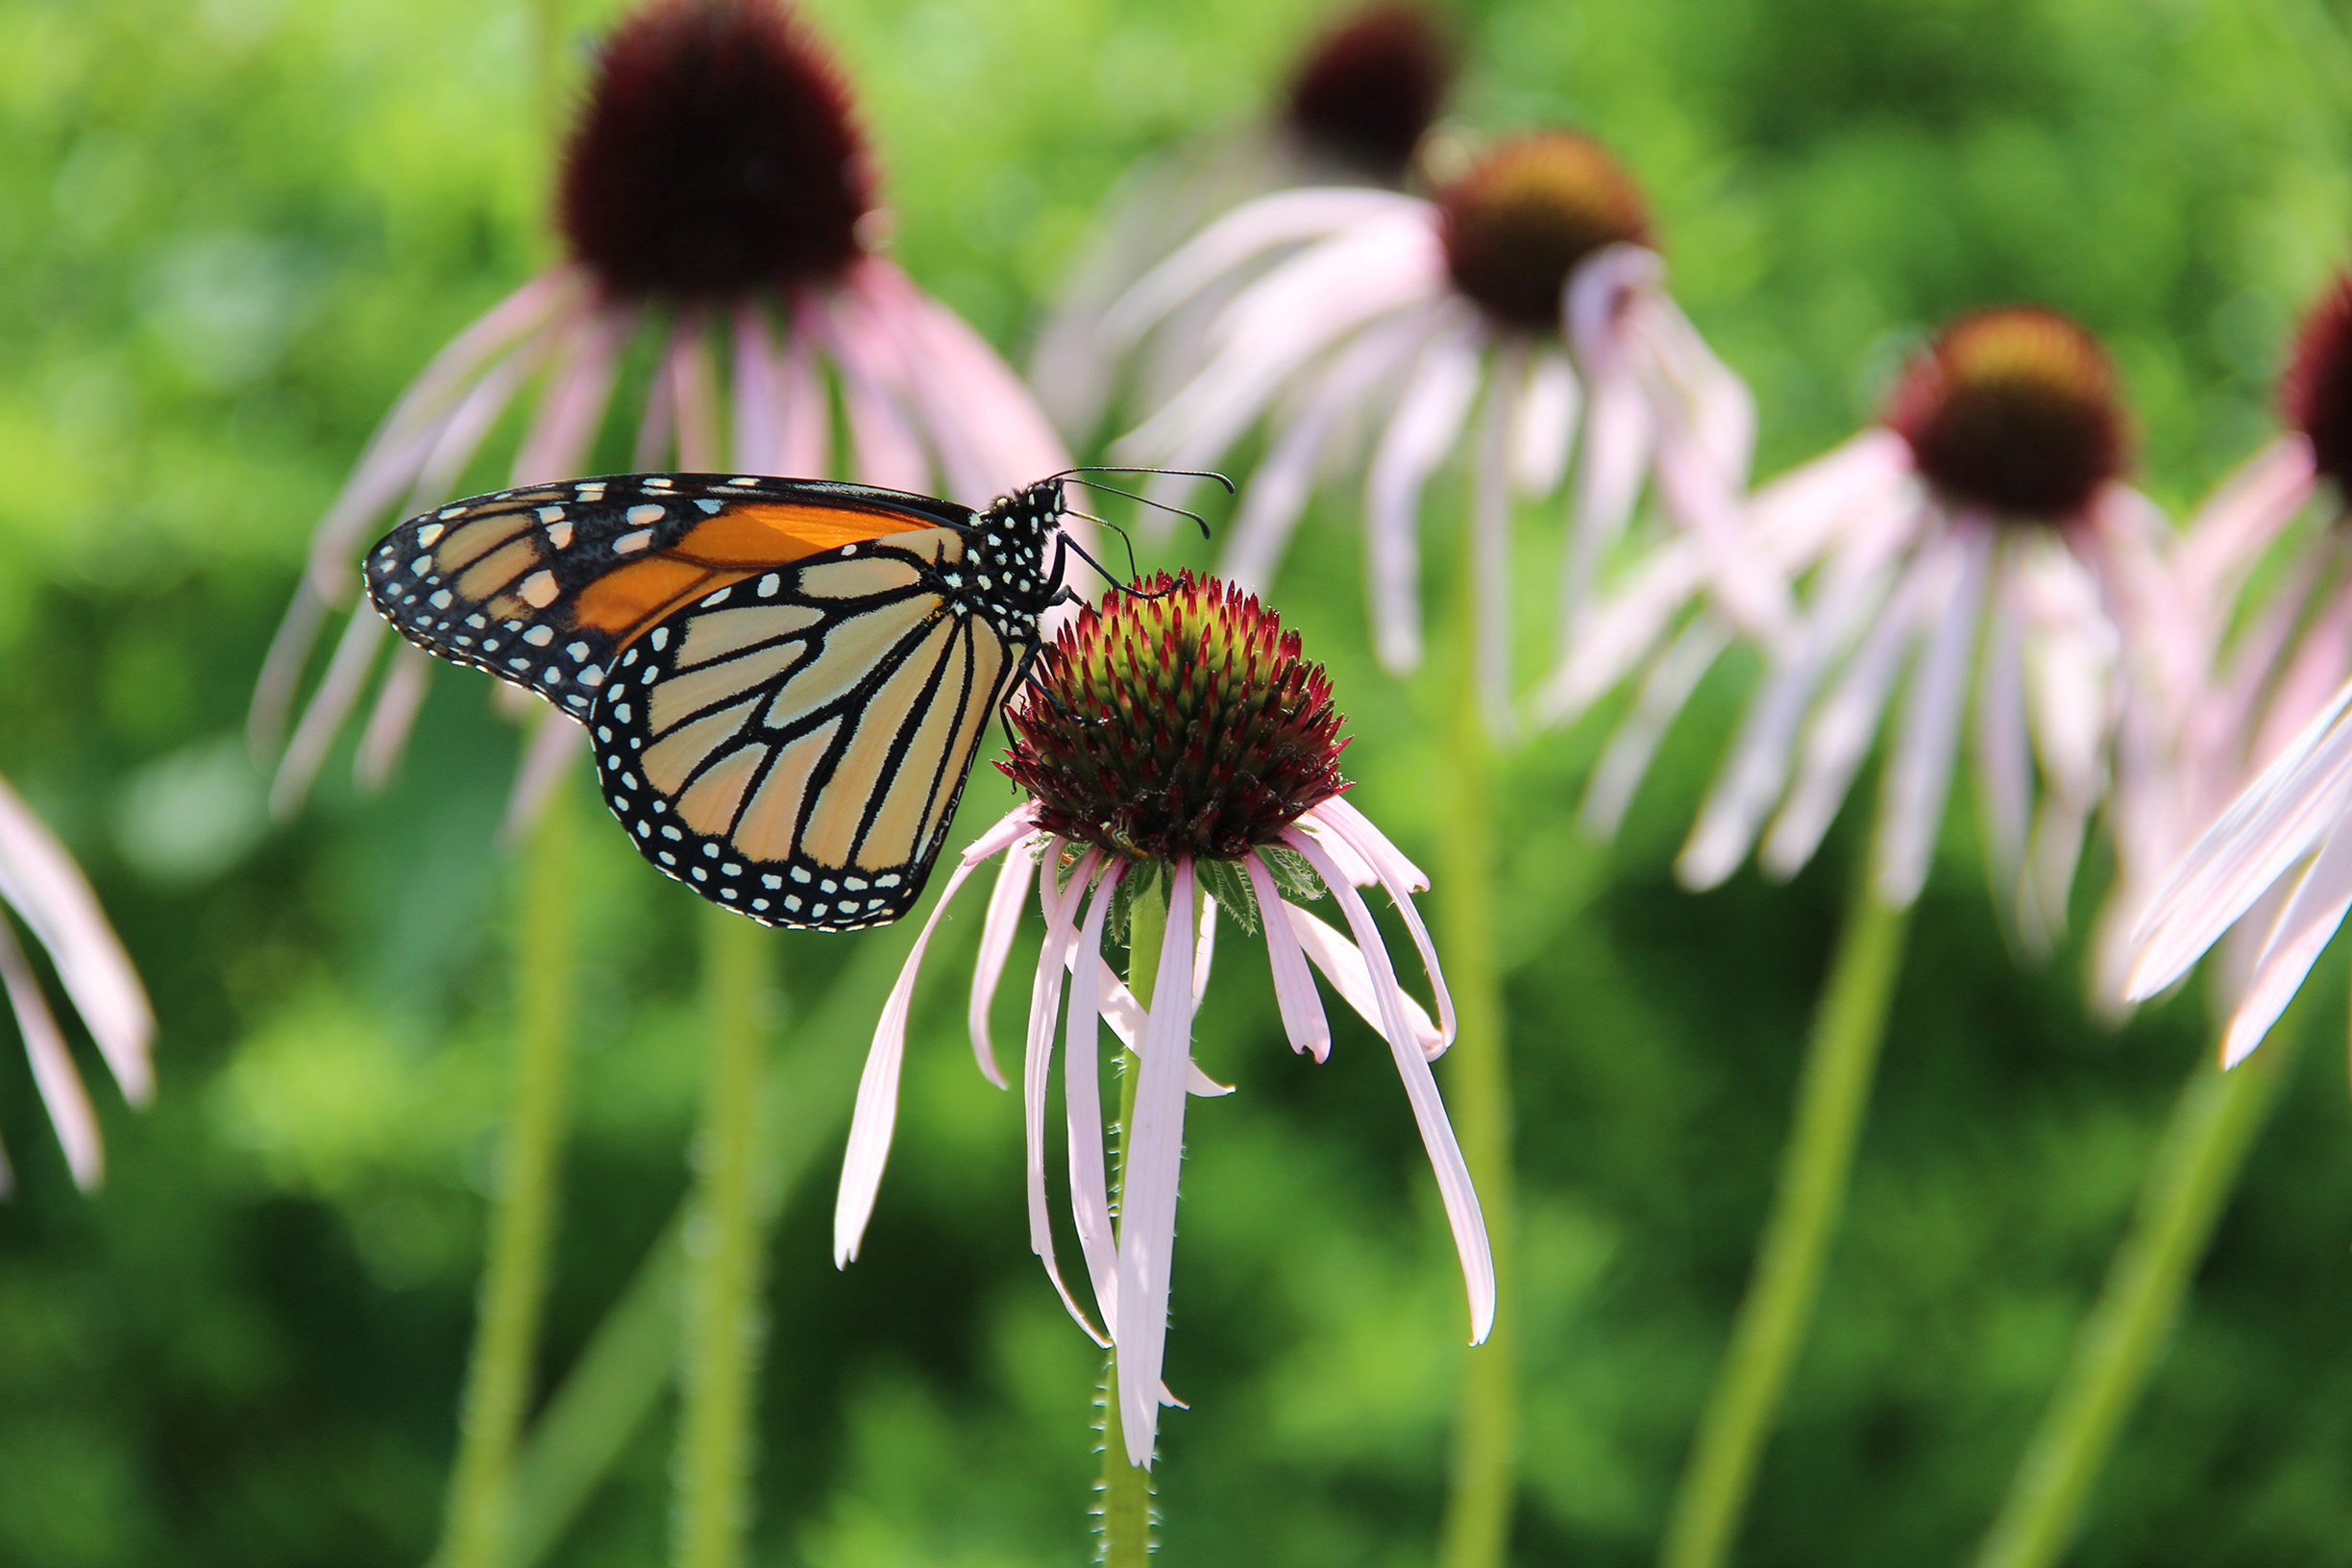 "The monarch may be America’s best-known butterfly. In December, the U.S. Fish and Wildlife Service announced that, despite significant losses in numbers, it would not protect the monarch under the Endangered Species Act. (Photo: Jennifer Hopwood.)"